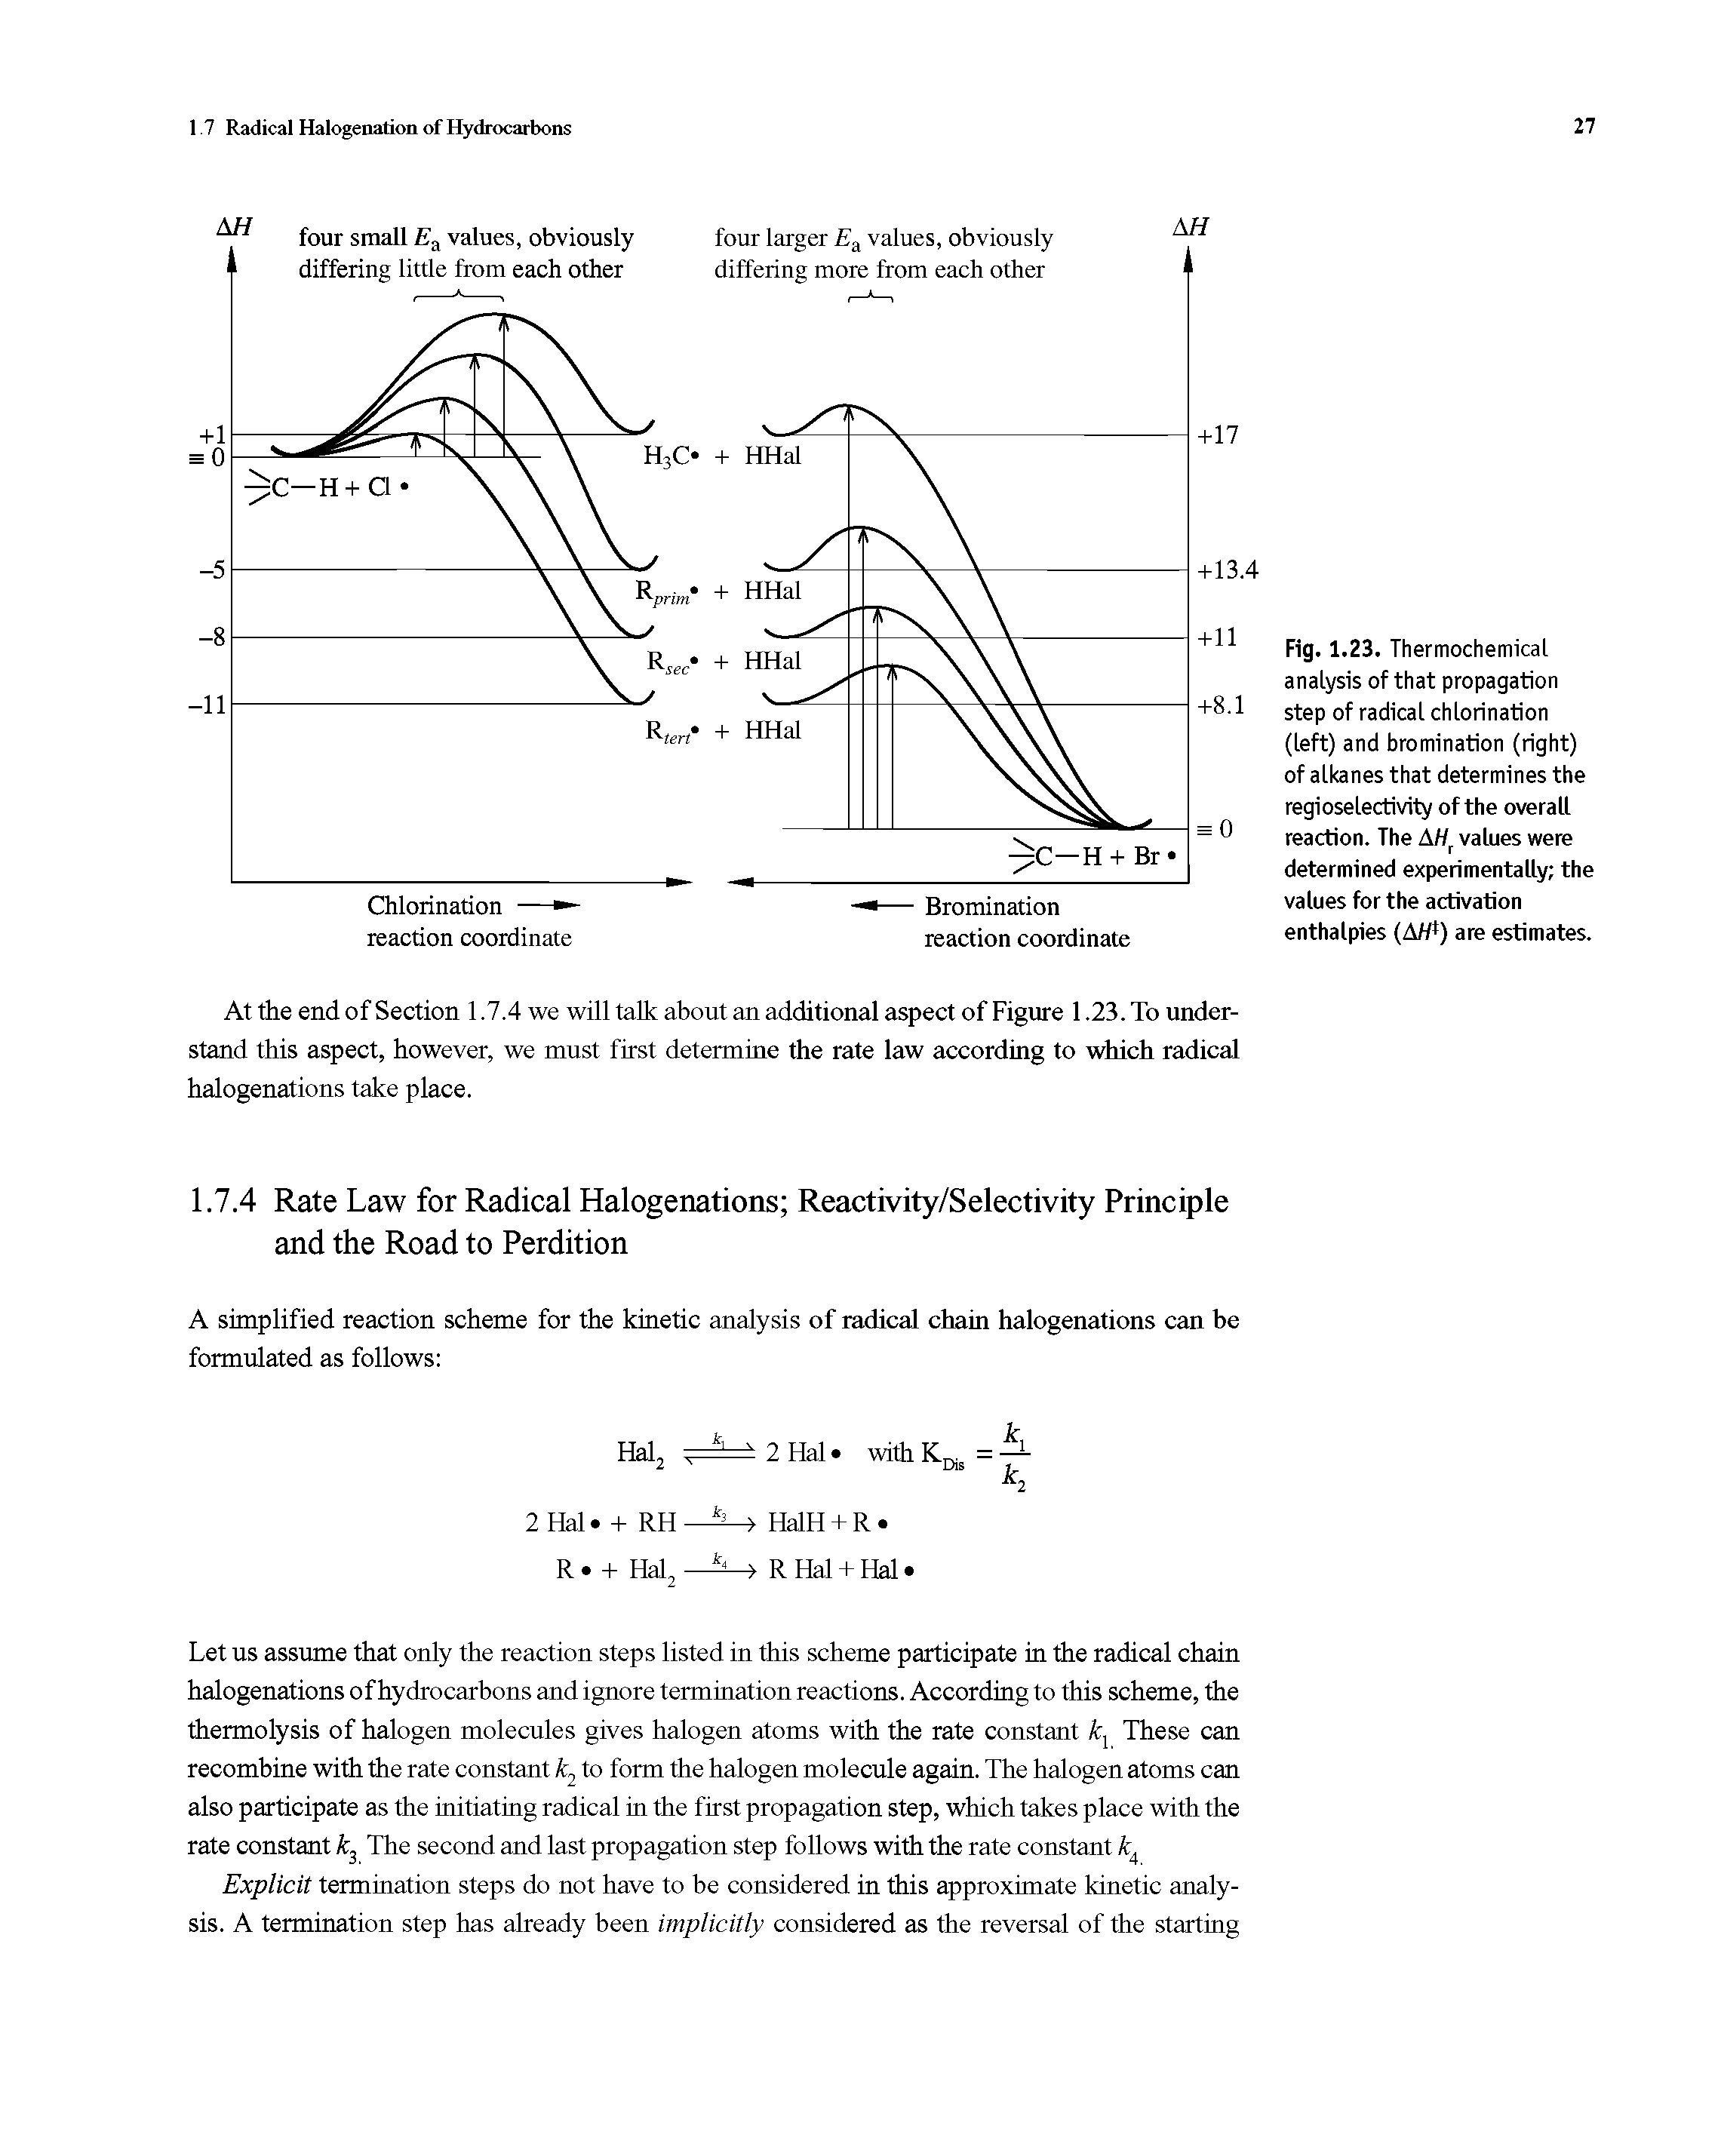 Fig. 1.23. Thermochemical analysis of that propagation step of radical chlorination (left) and bromination (right) of alkanes that determines the regioselectivity of the overall reaction. The AW values were determined experimentally the values for the activation enthalpies (AW ) are estimates.